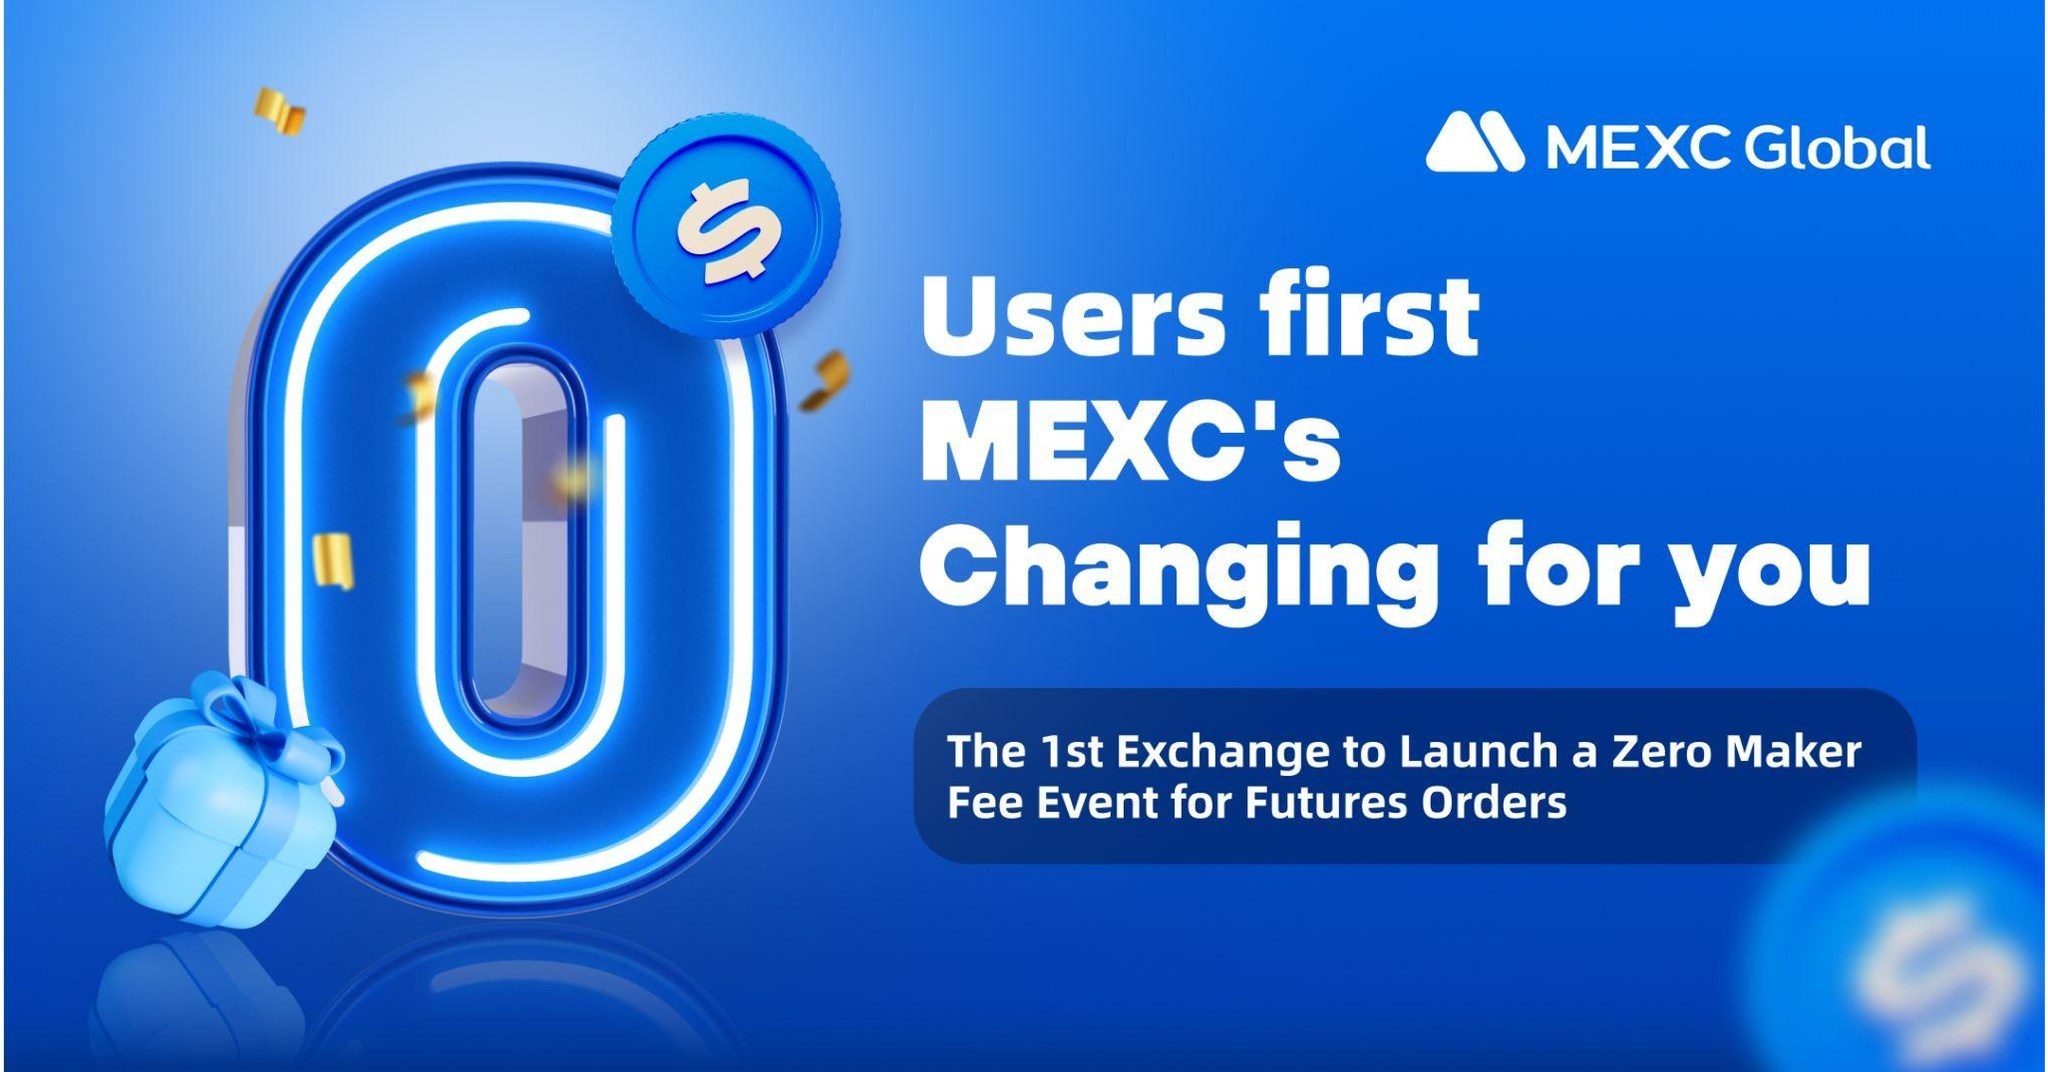 MEXC, The First Exchange to Launch a “Zero Maker Fee” Event